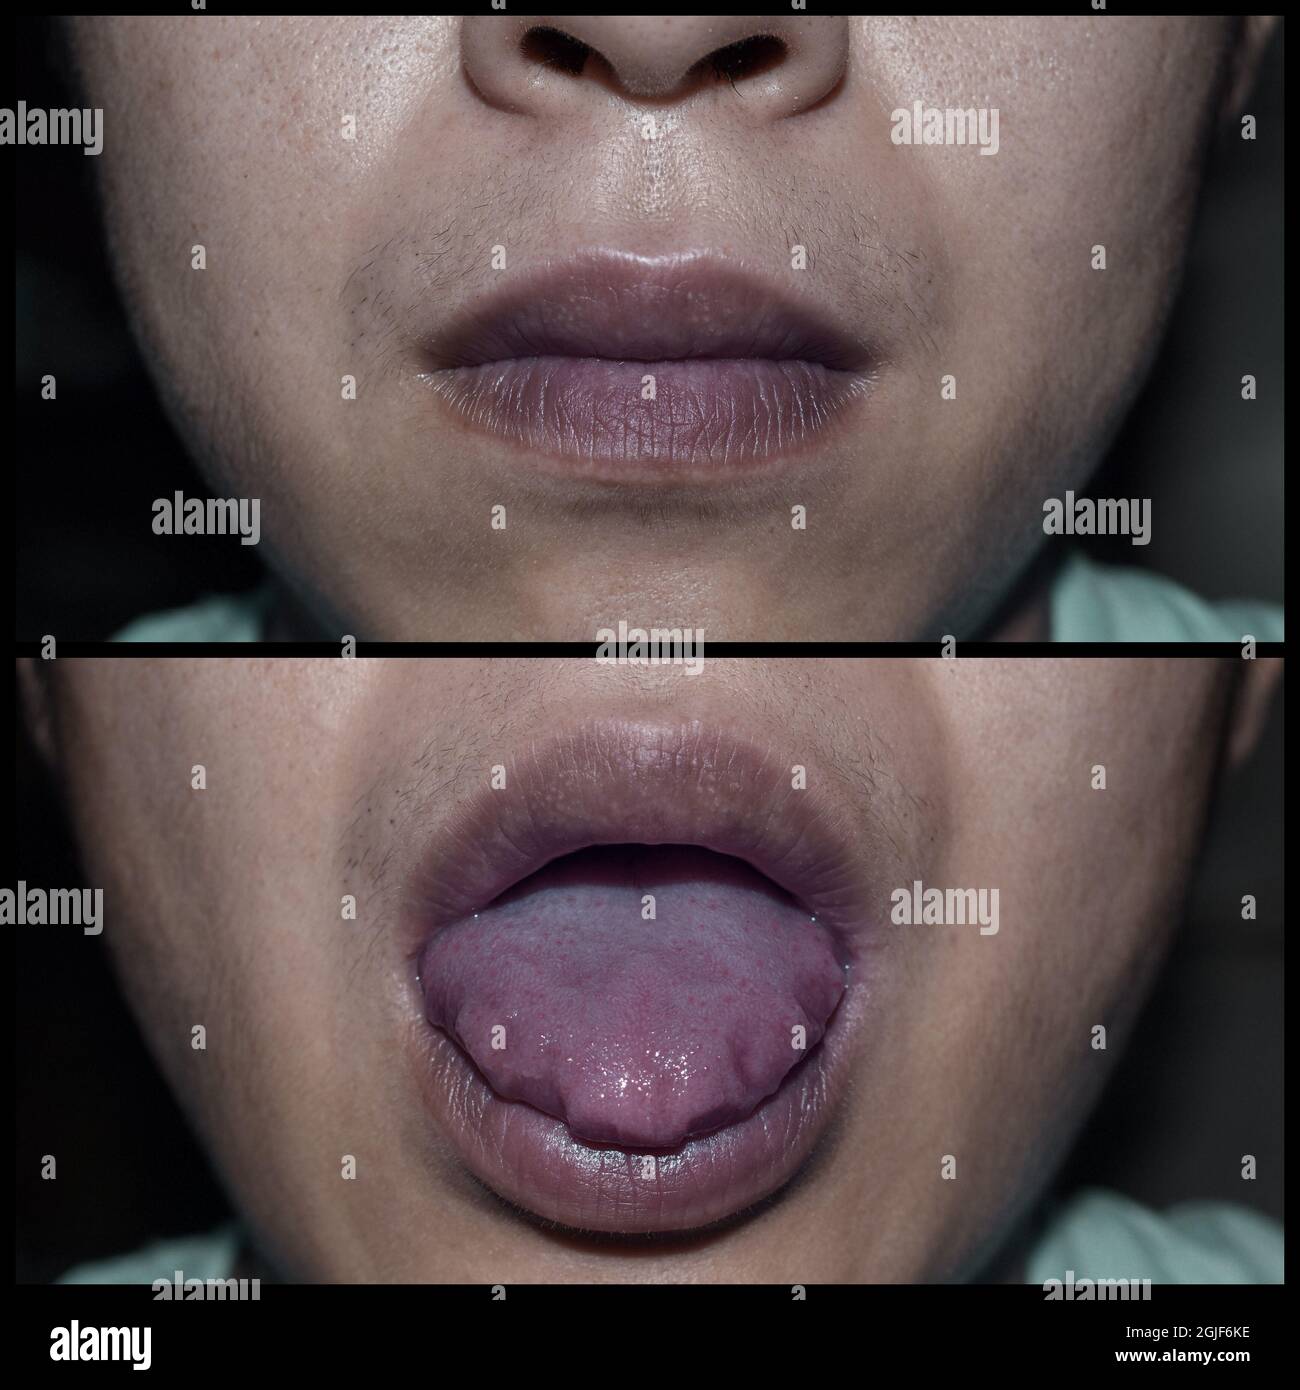 Cyanotic lips or central cyanosis at Southeast Asian, Chinese young man with COVID-19 disease. Front view. Stock Photo